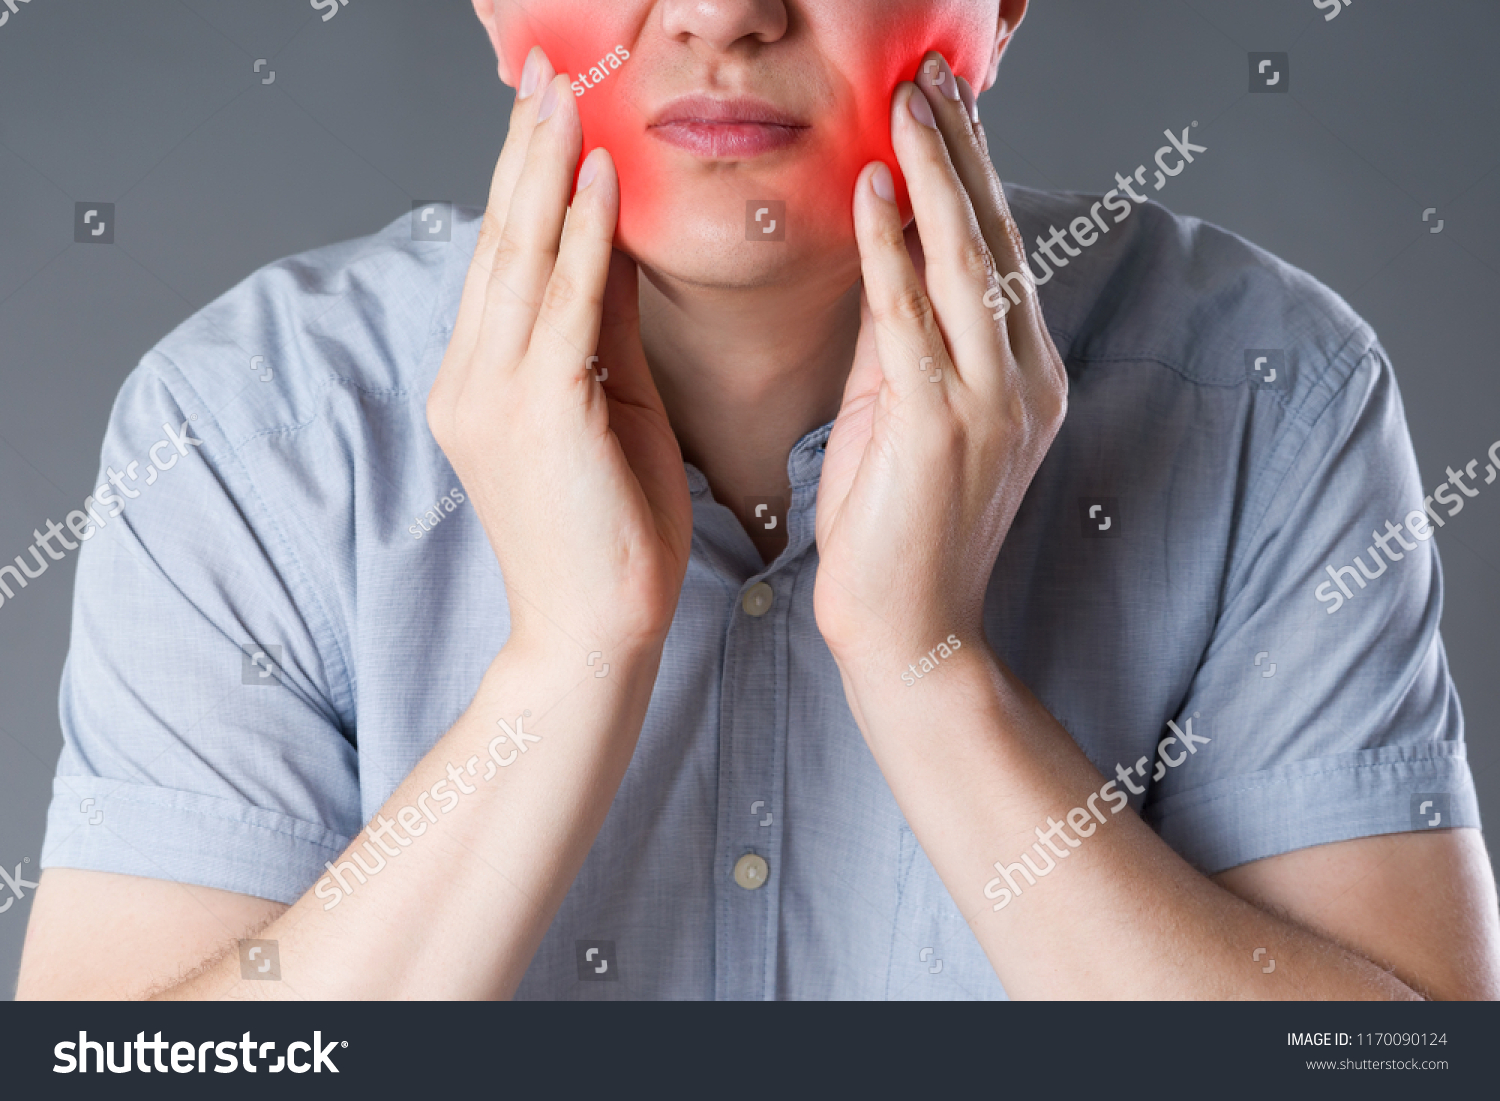 Wisdom teeth, man suffering from a toothache on gray background, painful area highlighted in red #1170090124